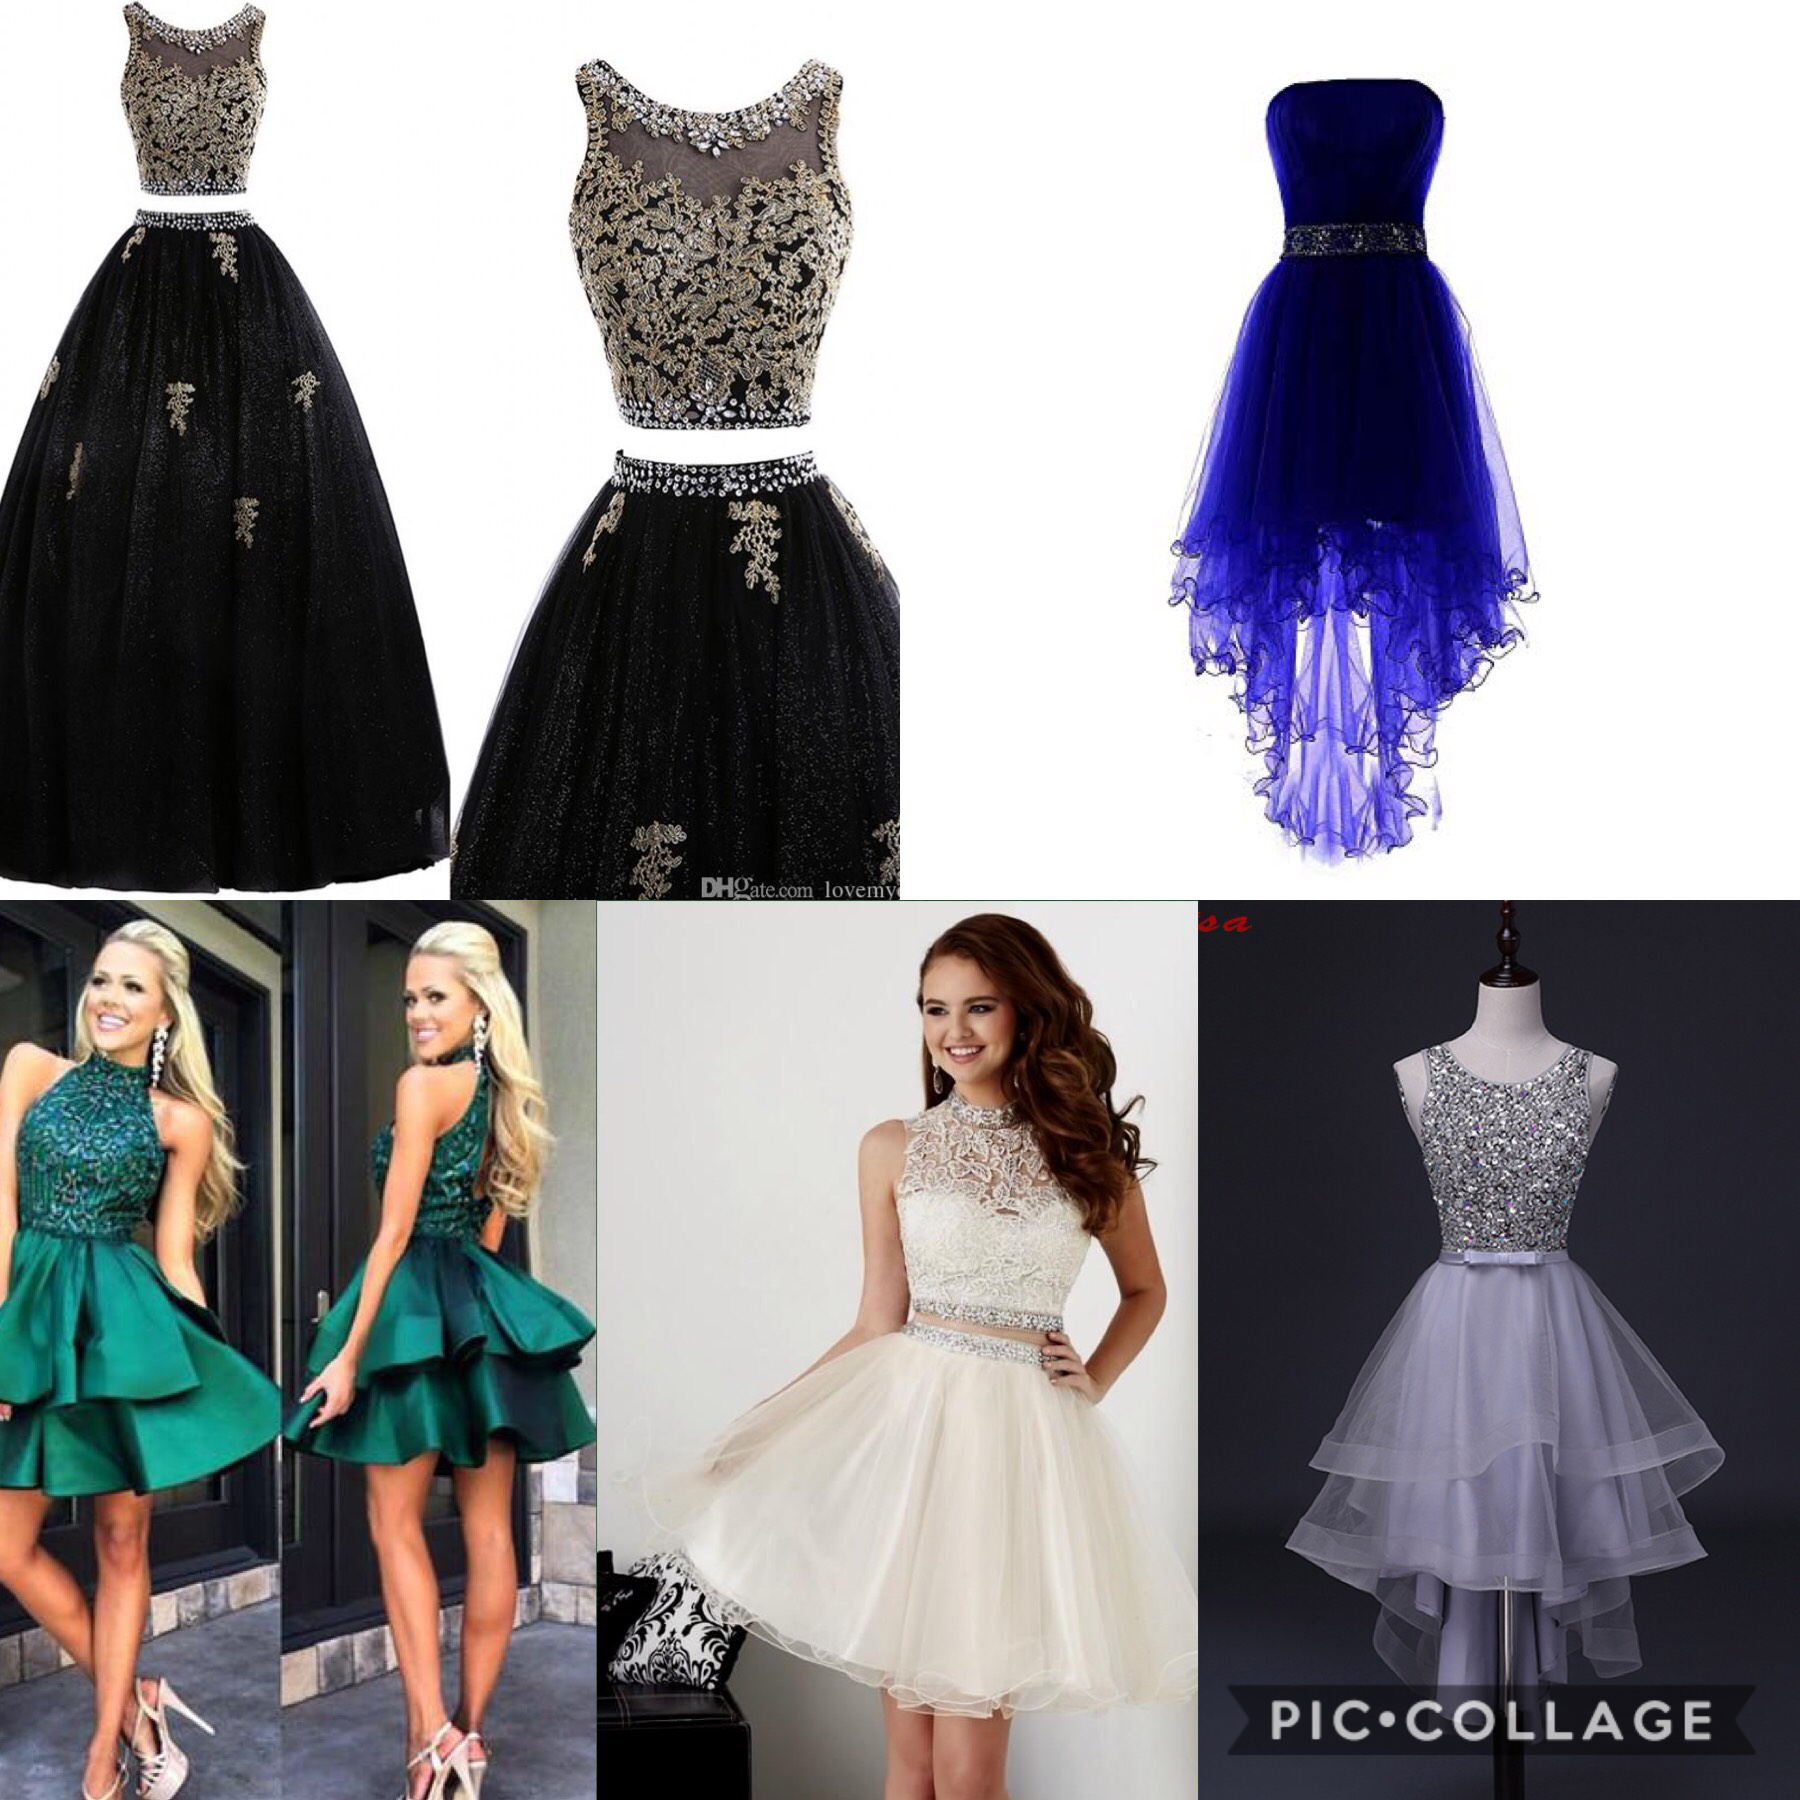 Which one is your favorite formal/homecoming dance dress